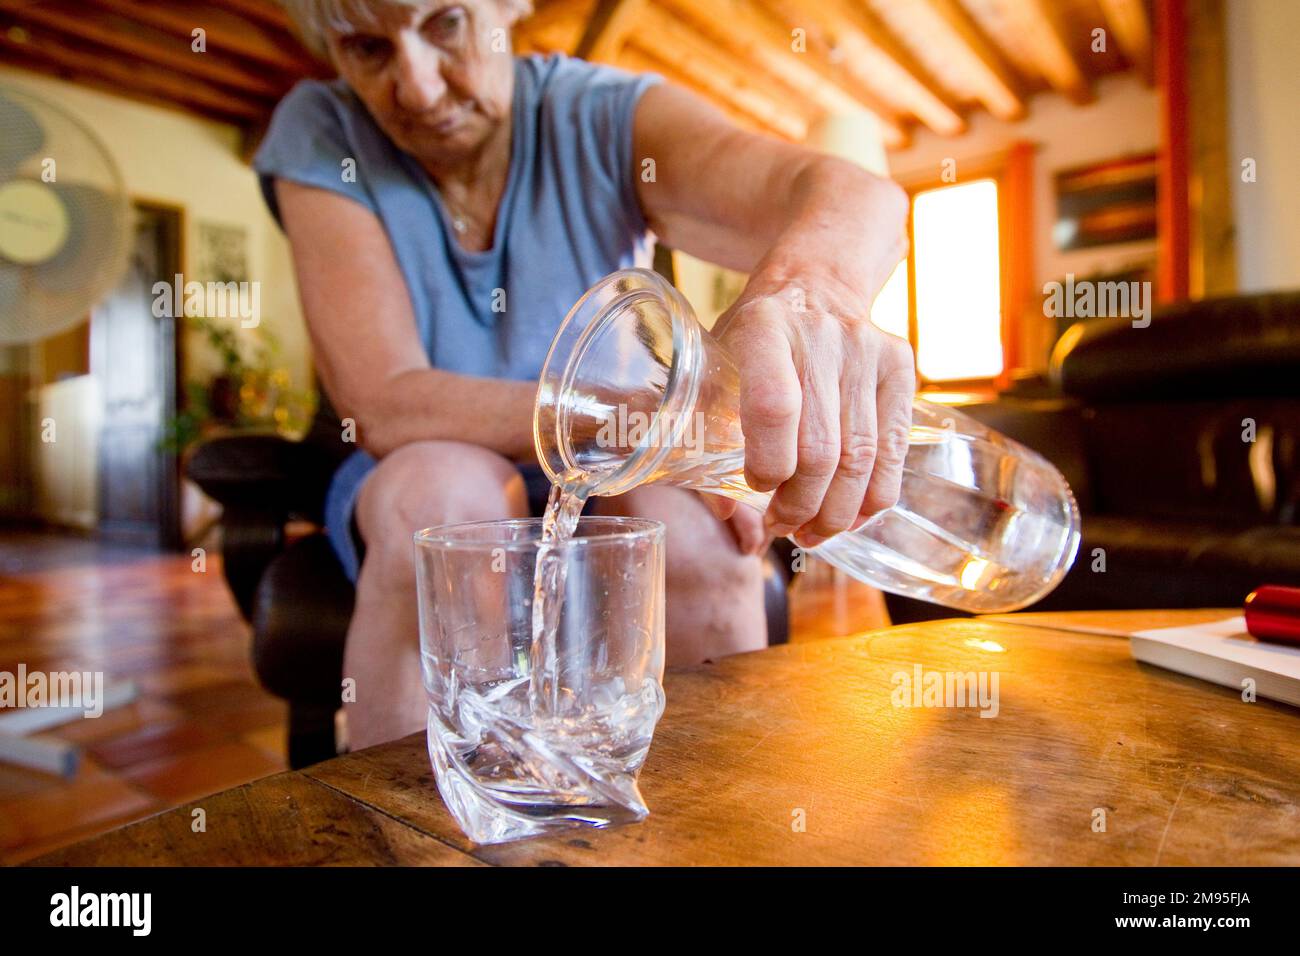 Senior citizens and heat wave: staying hydrated. Intense heat: old woman drinking water. Illustration, elderly people and hydration, dehydration risk Stock Photo